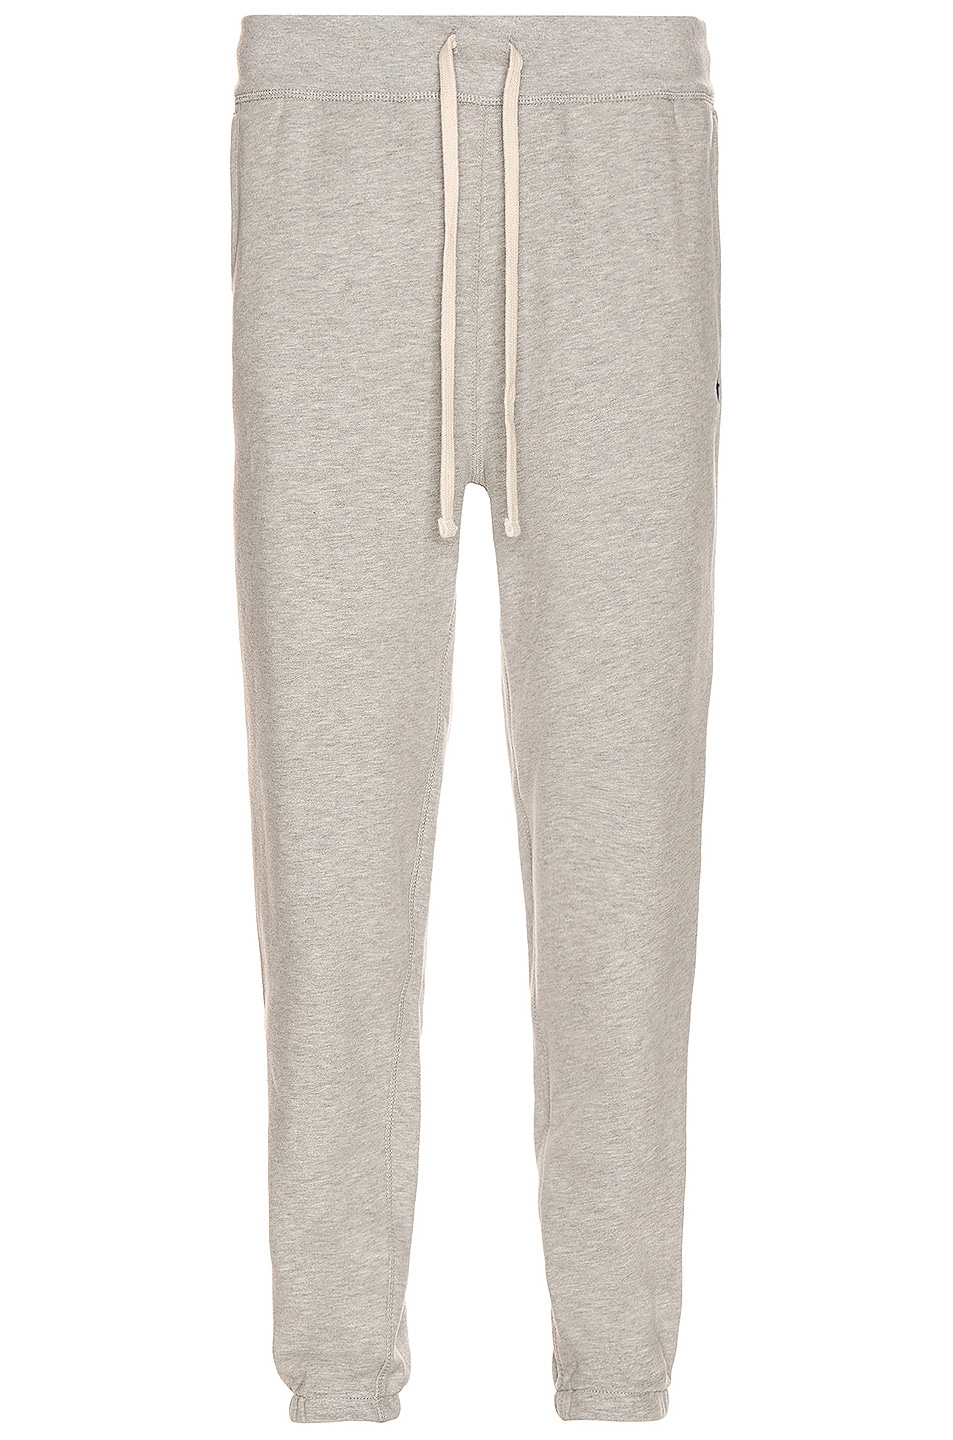 Image 1 of Polo Ralph Lauren Fleece Pant Relaxed in Andover Heather